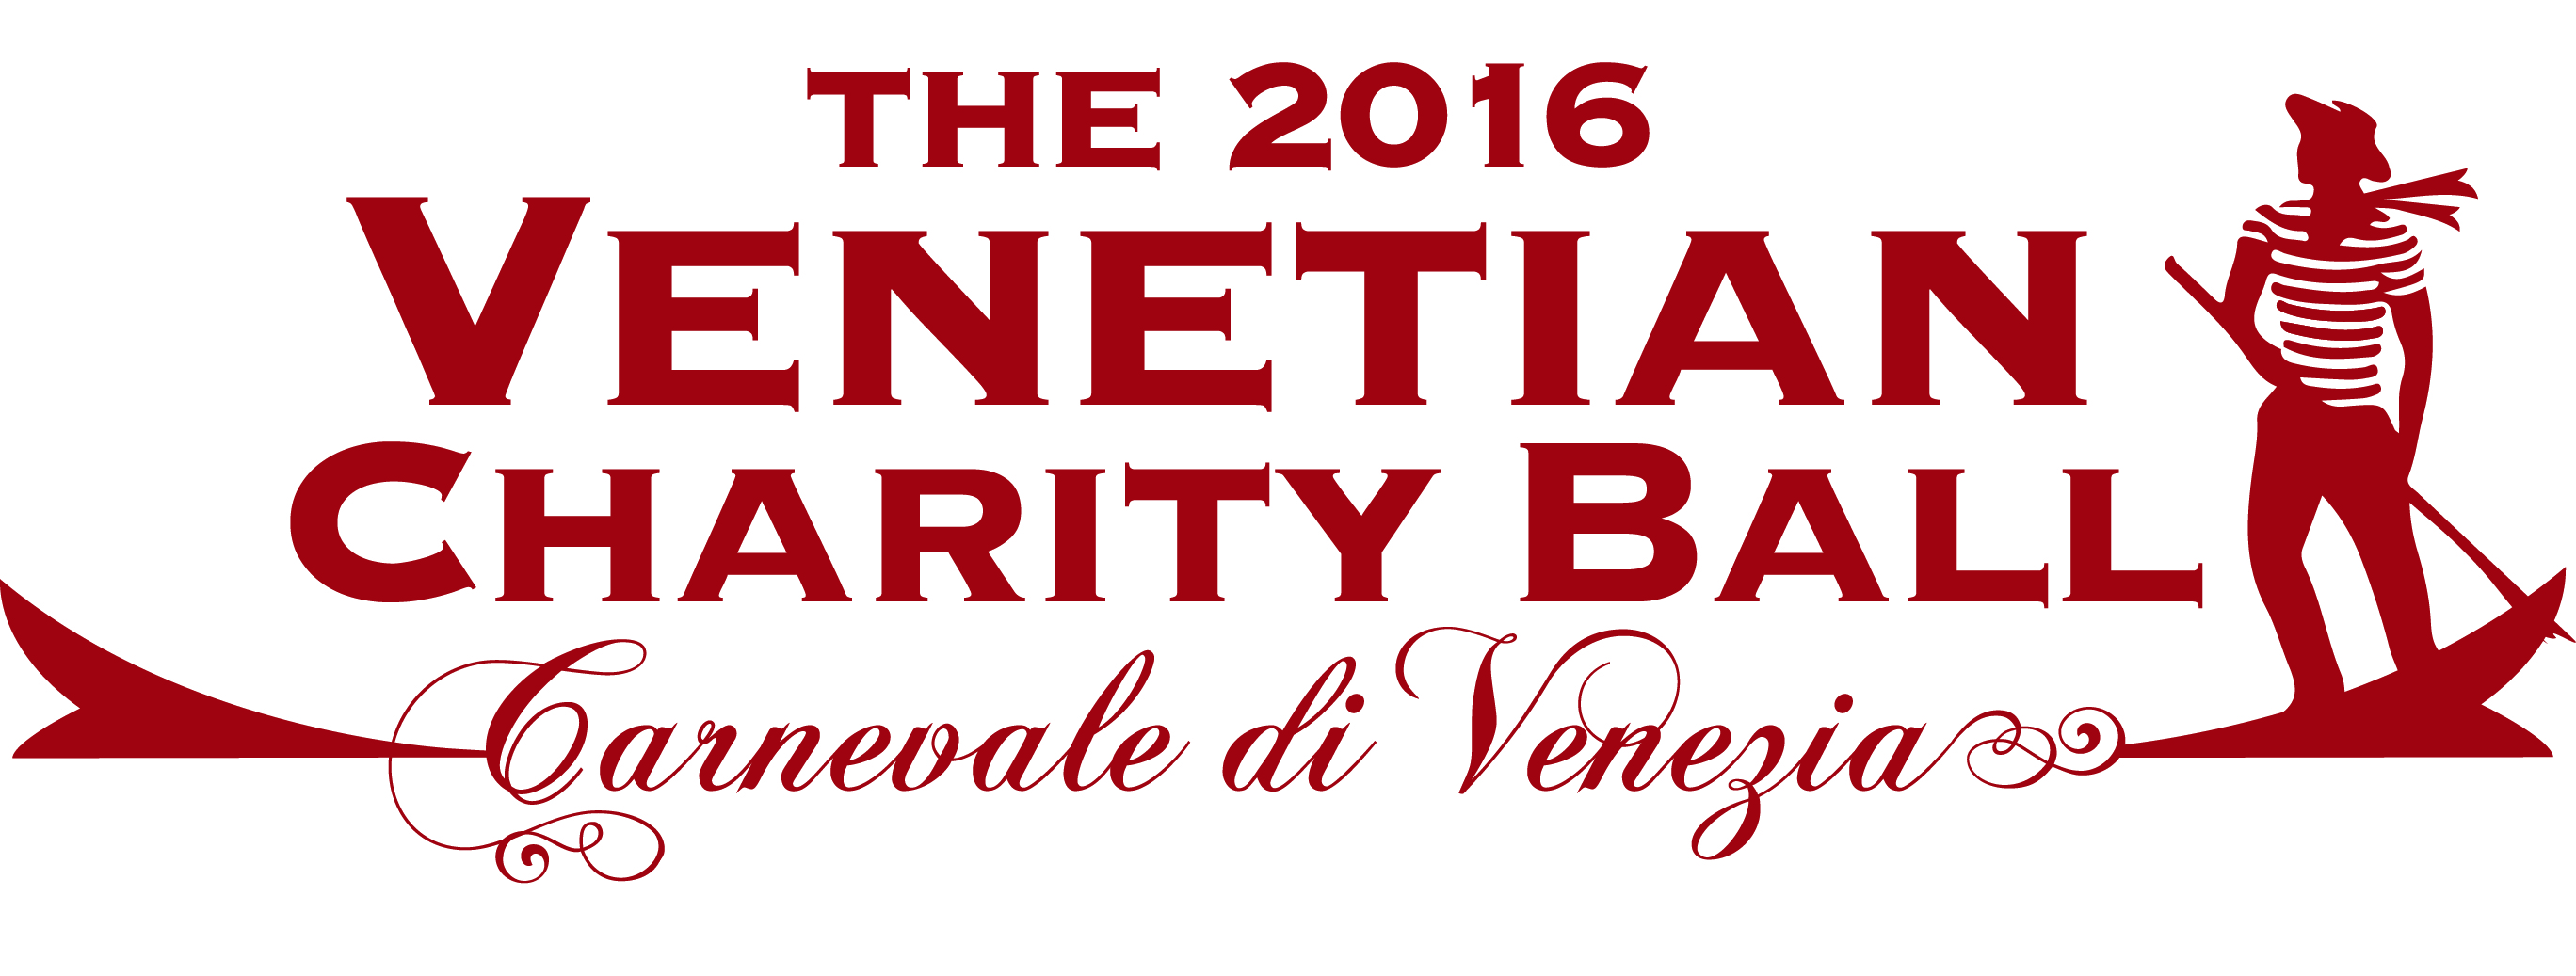 Tickets now on sale for the 2016 Venetian Charity Ball